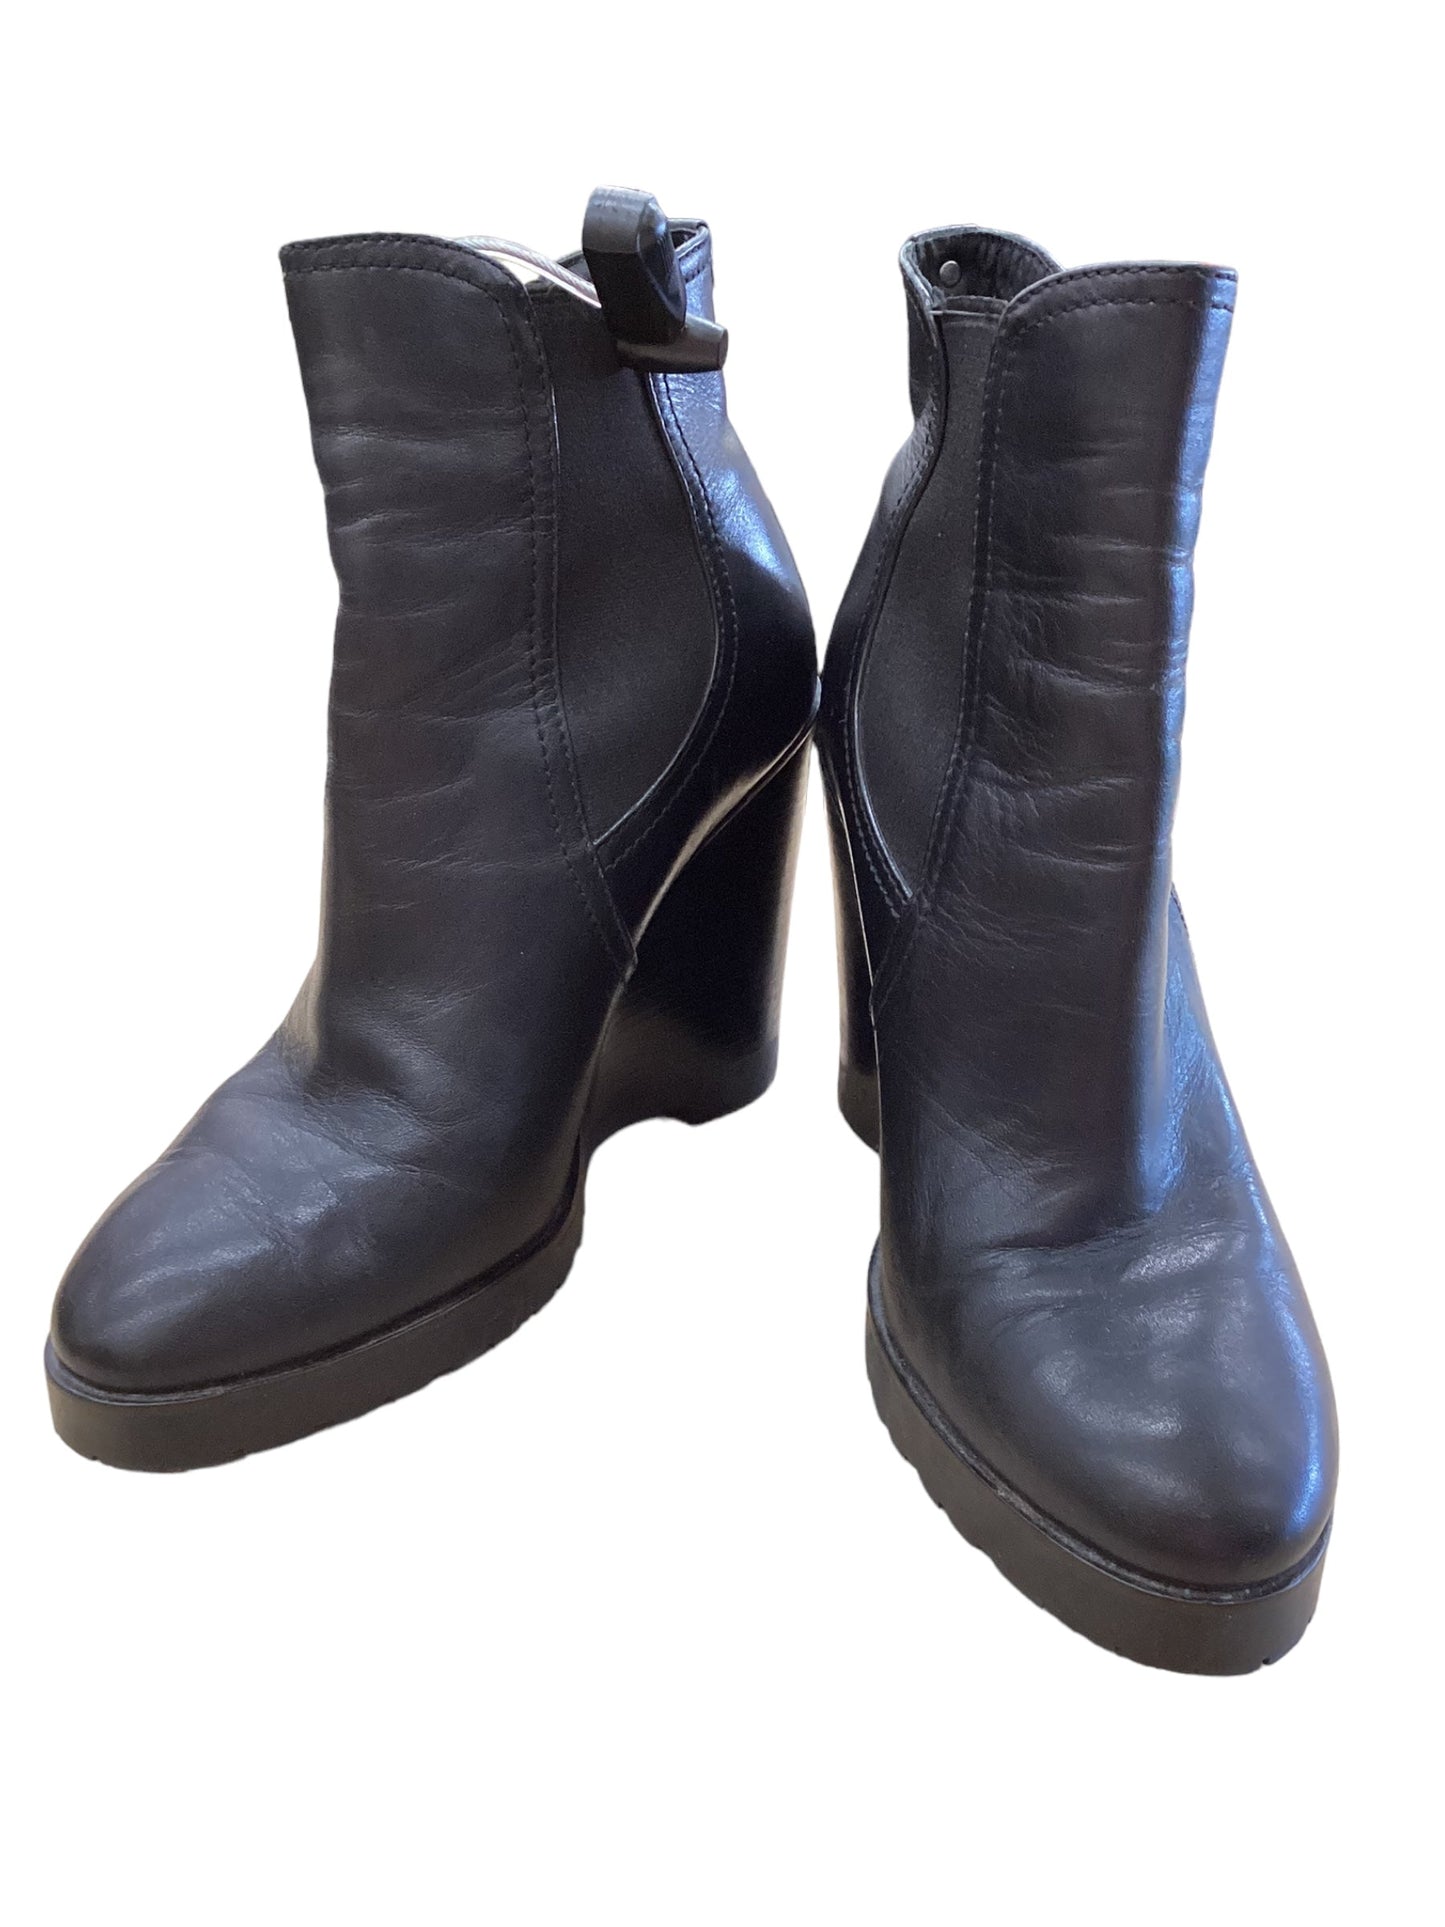 Boots Leather By Michael Kors  Size: 6.5